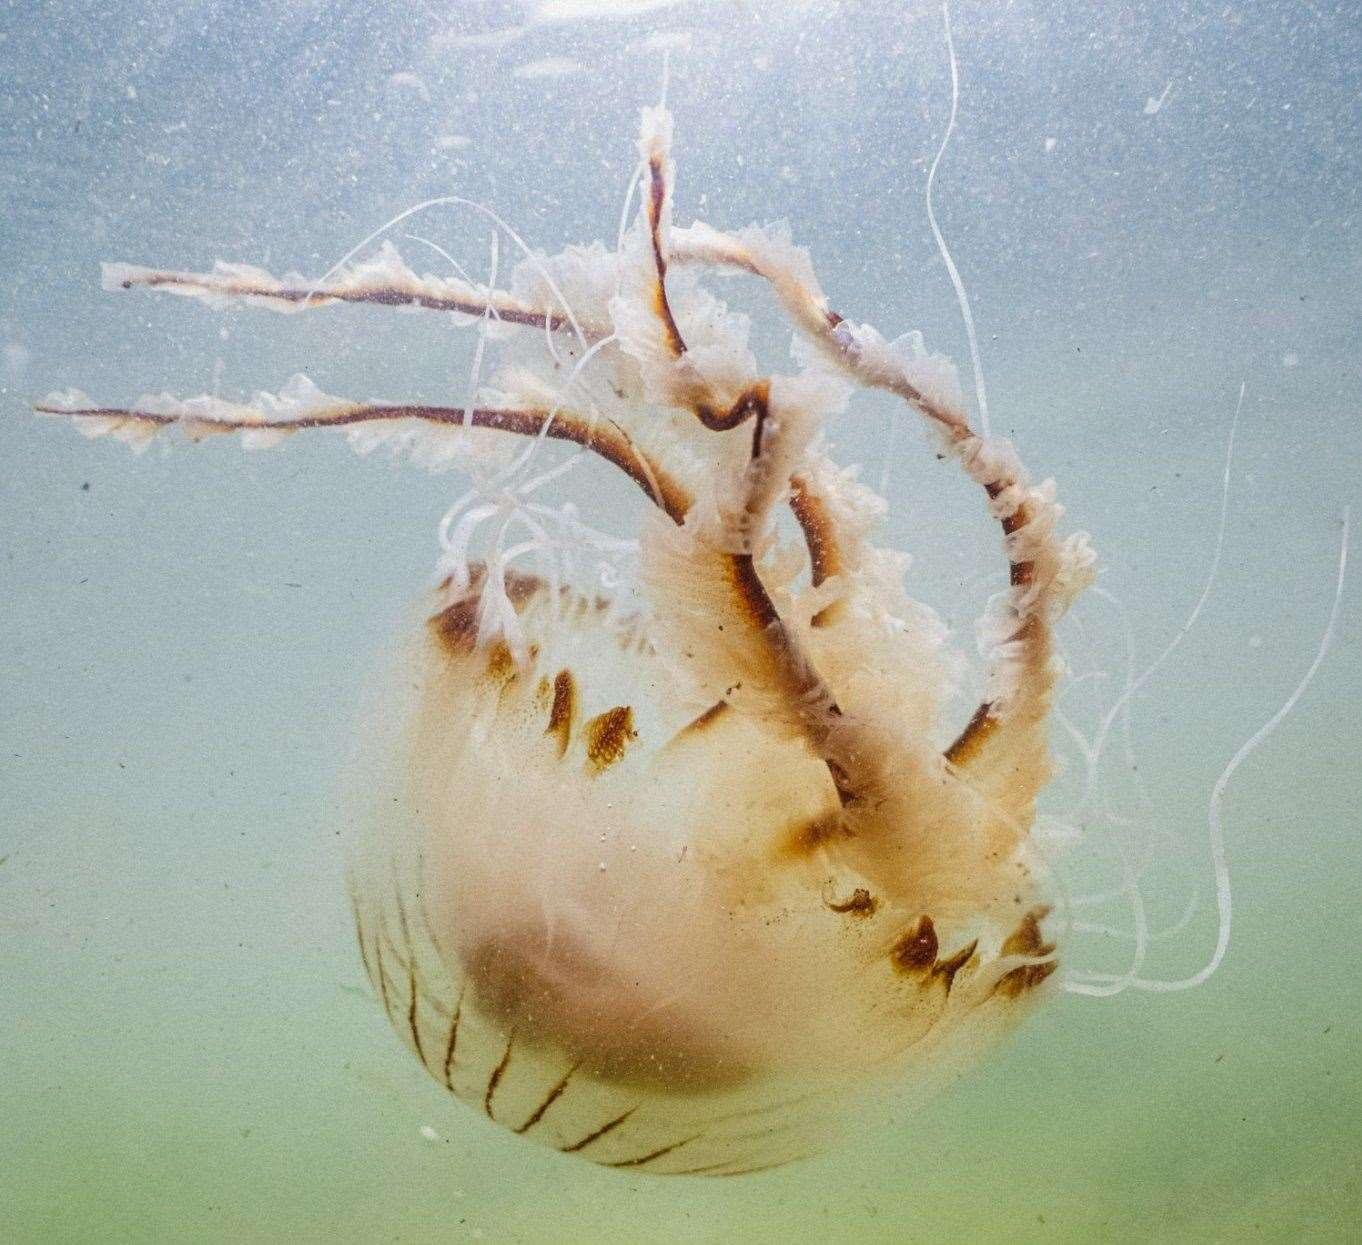 The compass jellyfish are said to carry a nasty sting. Picture: Rebecca Douglas